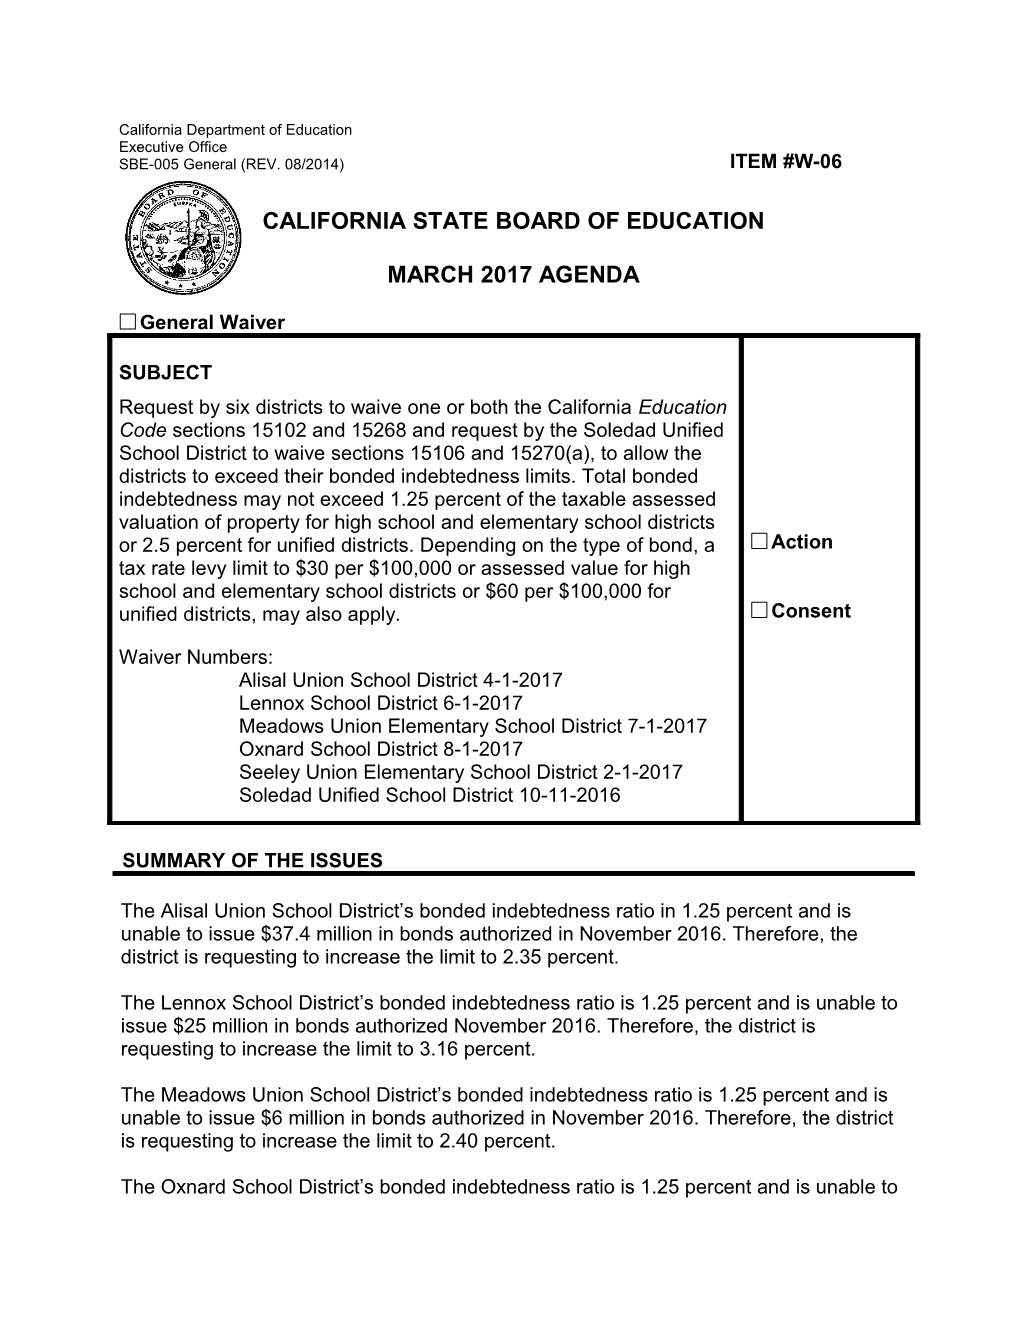 March 2017 Waiver Item W-06 - Meeting Agendas (CA State Board of Education)